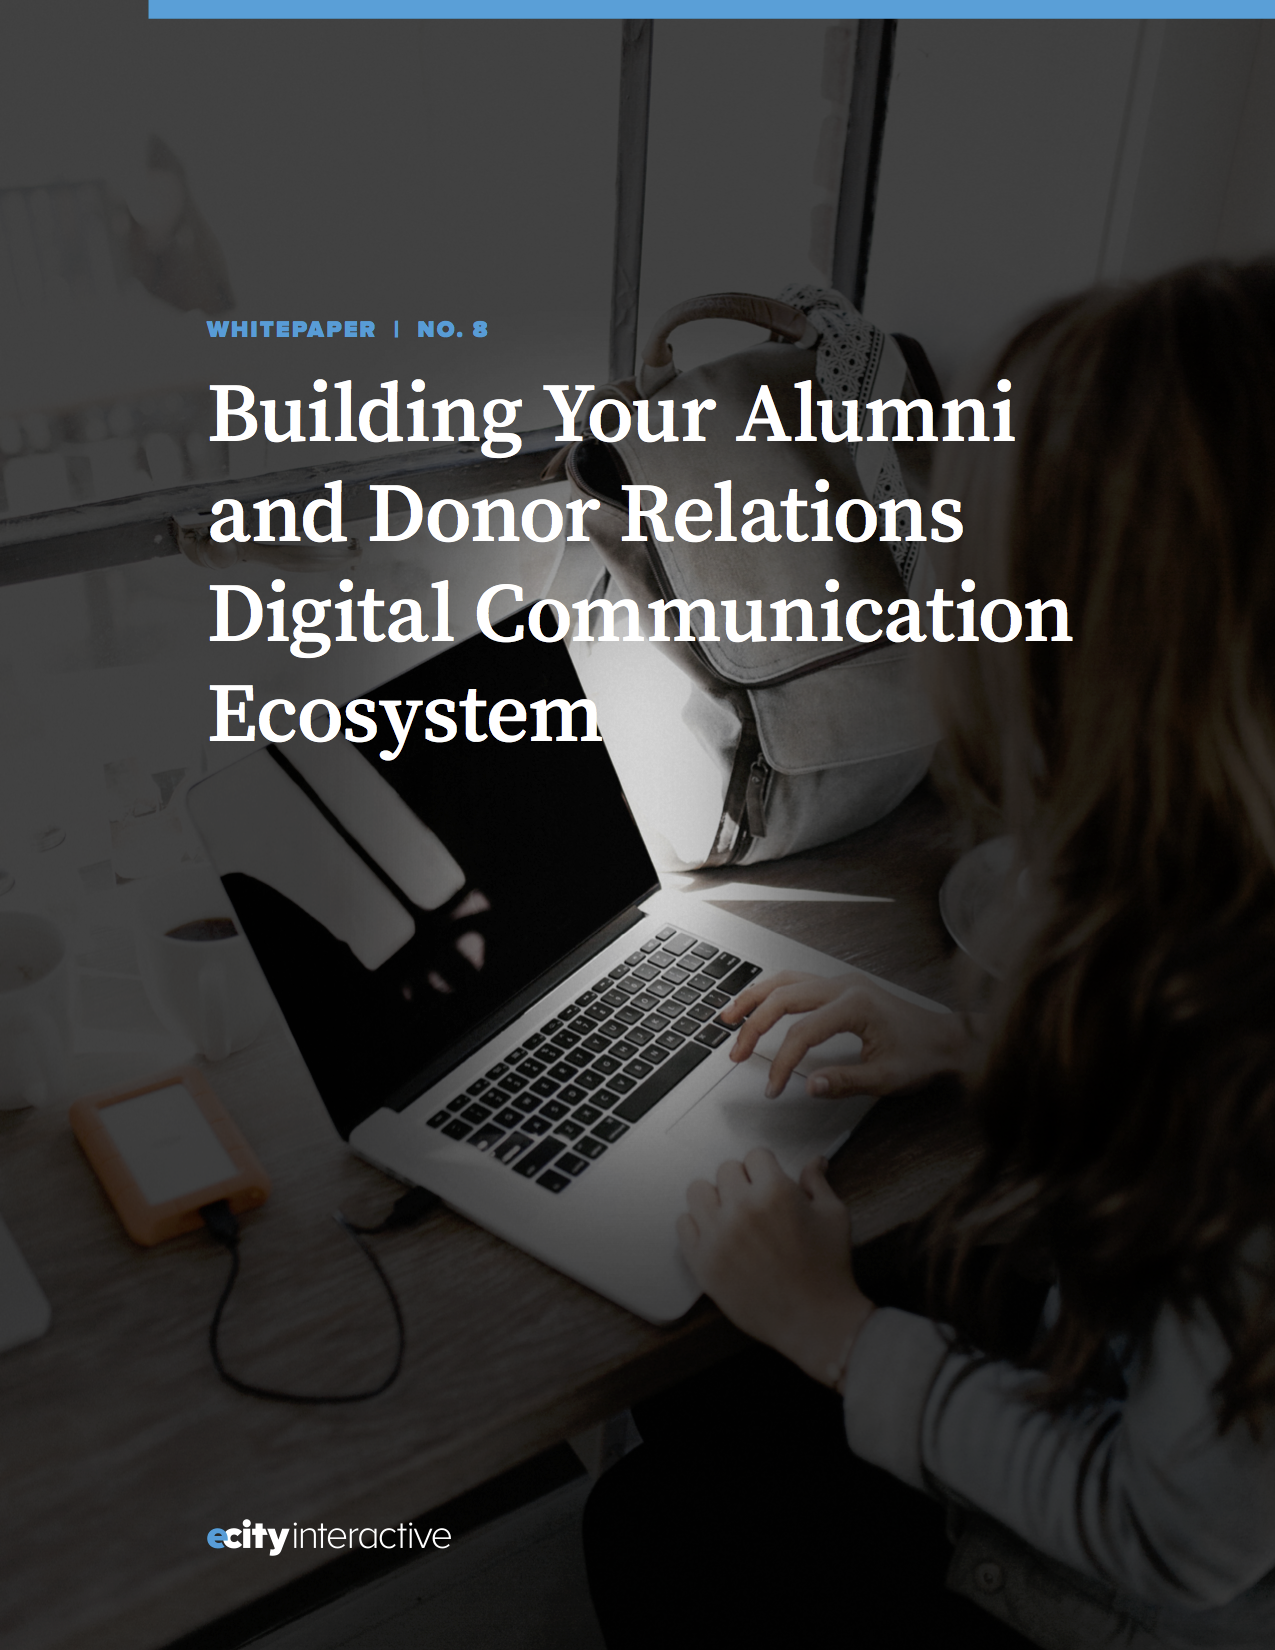 Building Your Alumni and Donor Relations Digital Communication Ecosystem